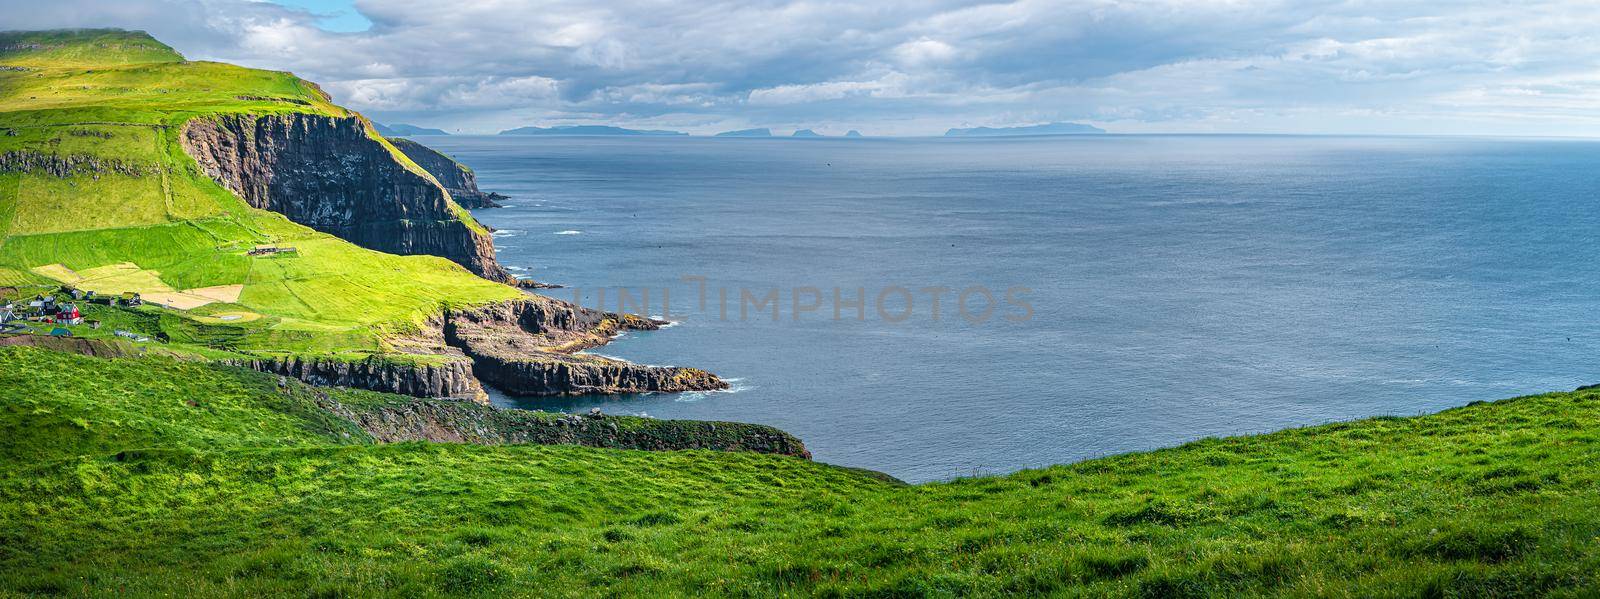 Panoramic view over mythical Faroe Island Mykines in the middle of Atlantic Ocean with a lot of puffins, parrot like seabirds